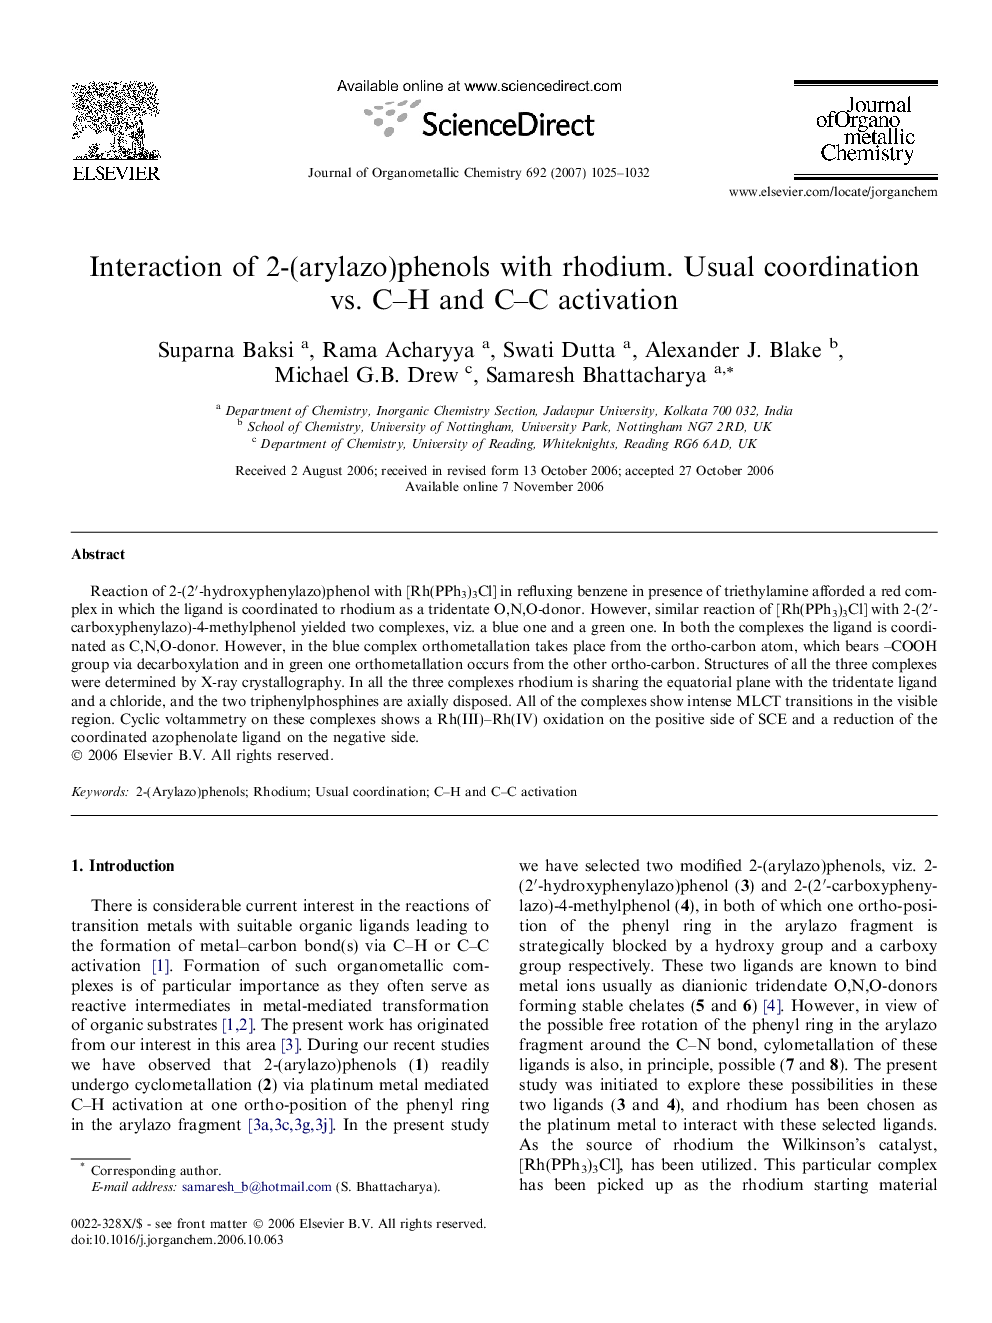 Interaction of 2-(arylazo)phenols with rhodium. Usual coordination vs. C–H and C–C activation